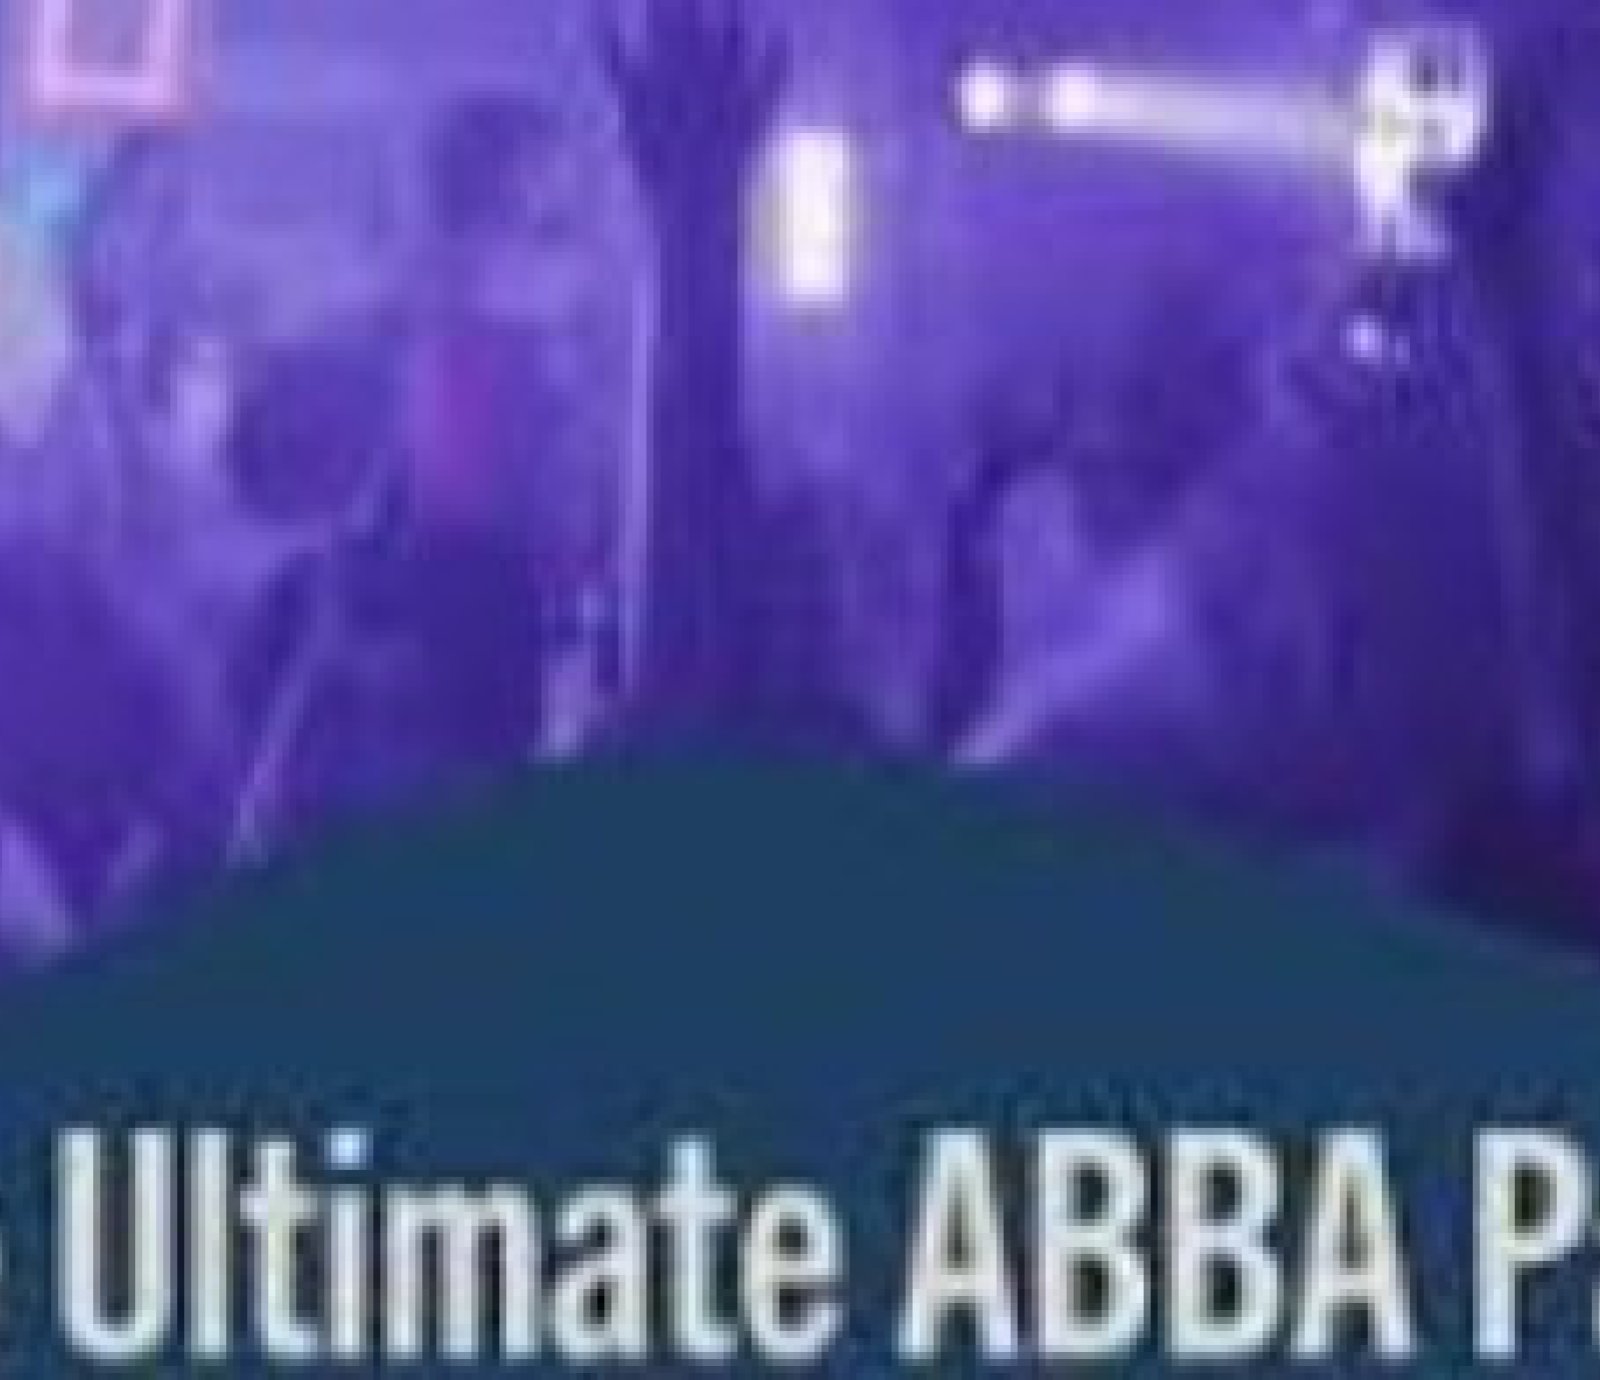 The Ultimate ABBA Party